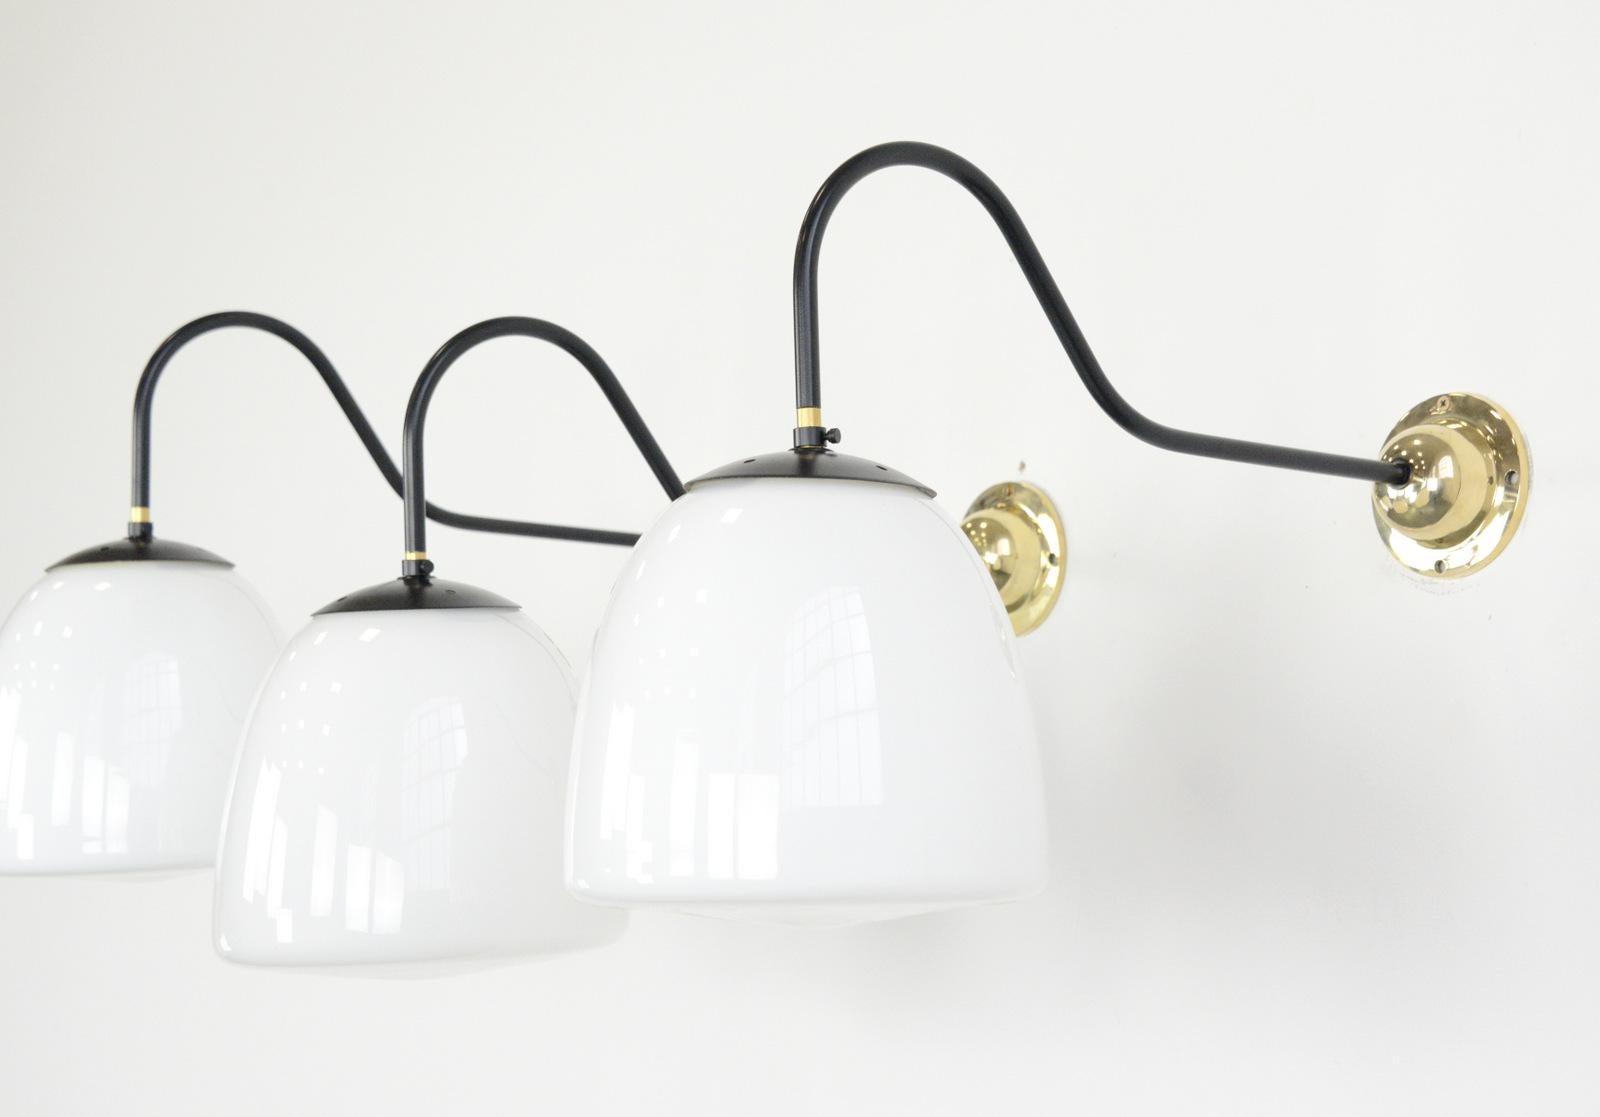 Czech Opaline wall lights, circa 1940s

- Price is per light (5 available)
- Curved arm with cast brass wall plate
- Wires directly into the wall
- Takes E27 fitting bulbs
- Czech, 1940s
- Measures: 62cm deep x 25cm wide x 42cm